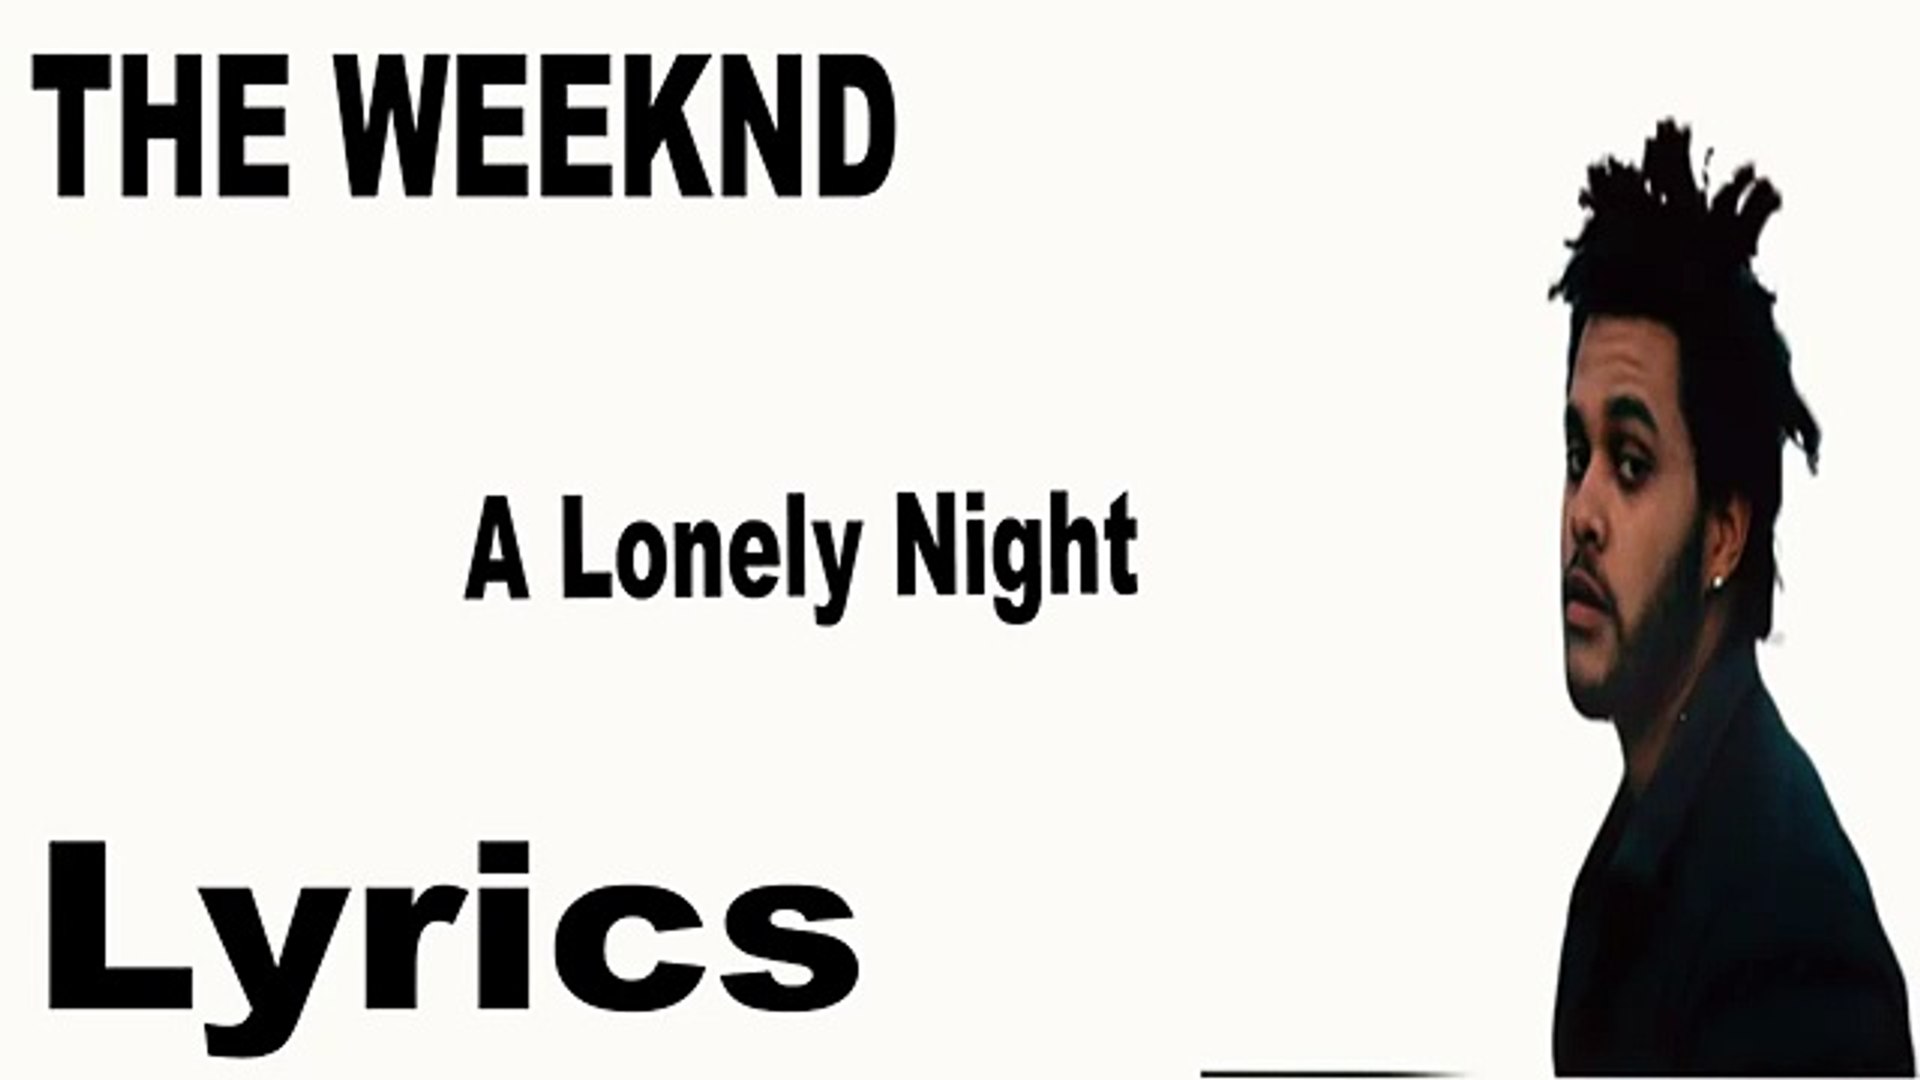 THE WEEKEND A Lonely Night Lyrics - Vidéo Dailymotion